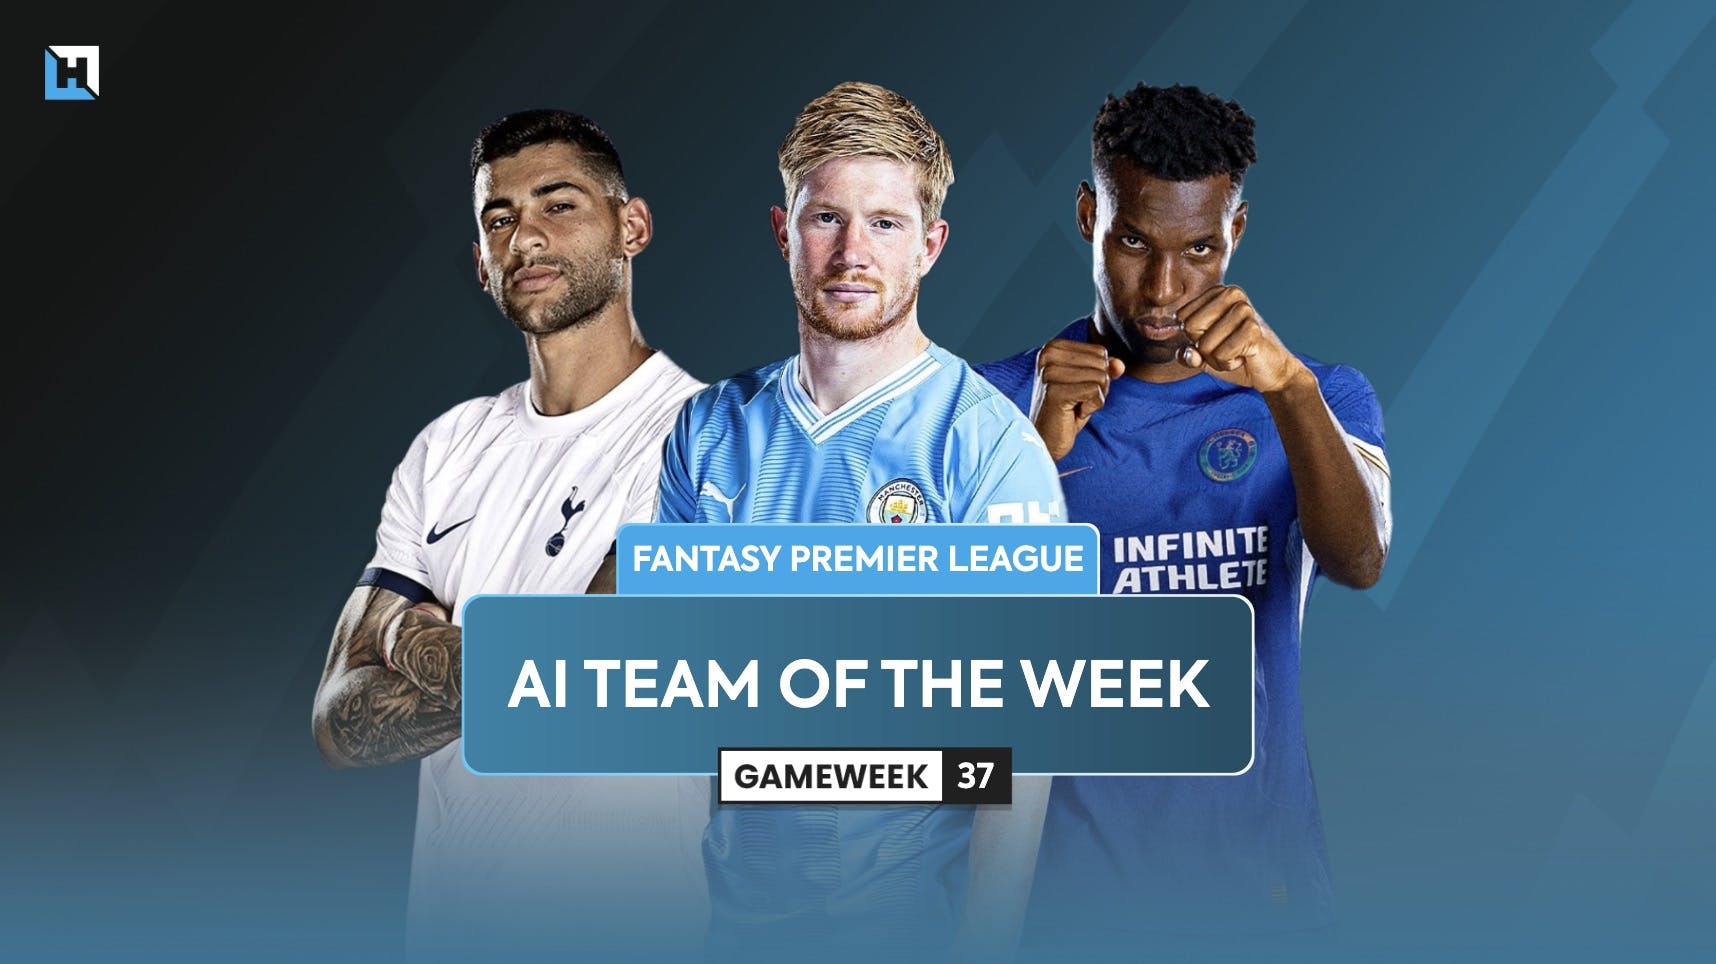 The best FPL team for Double Gameweek 37 according to Hub AI